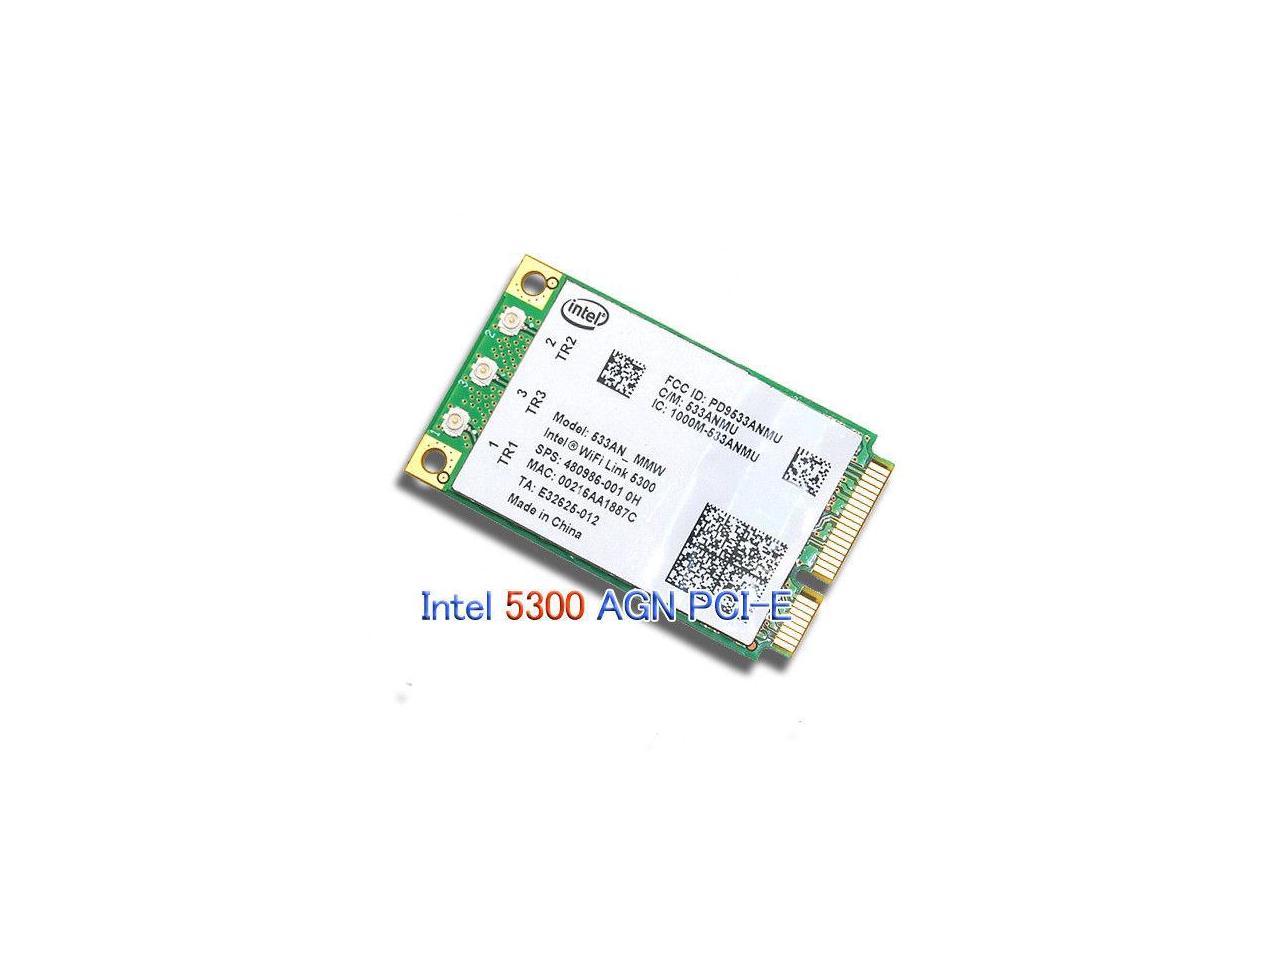 hp wifi link 5100 agn driver